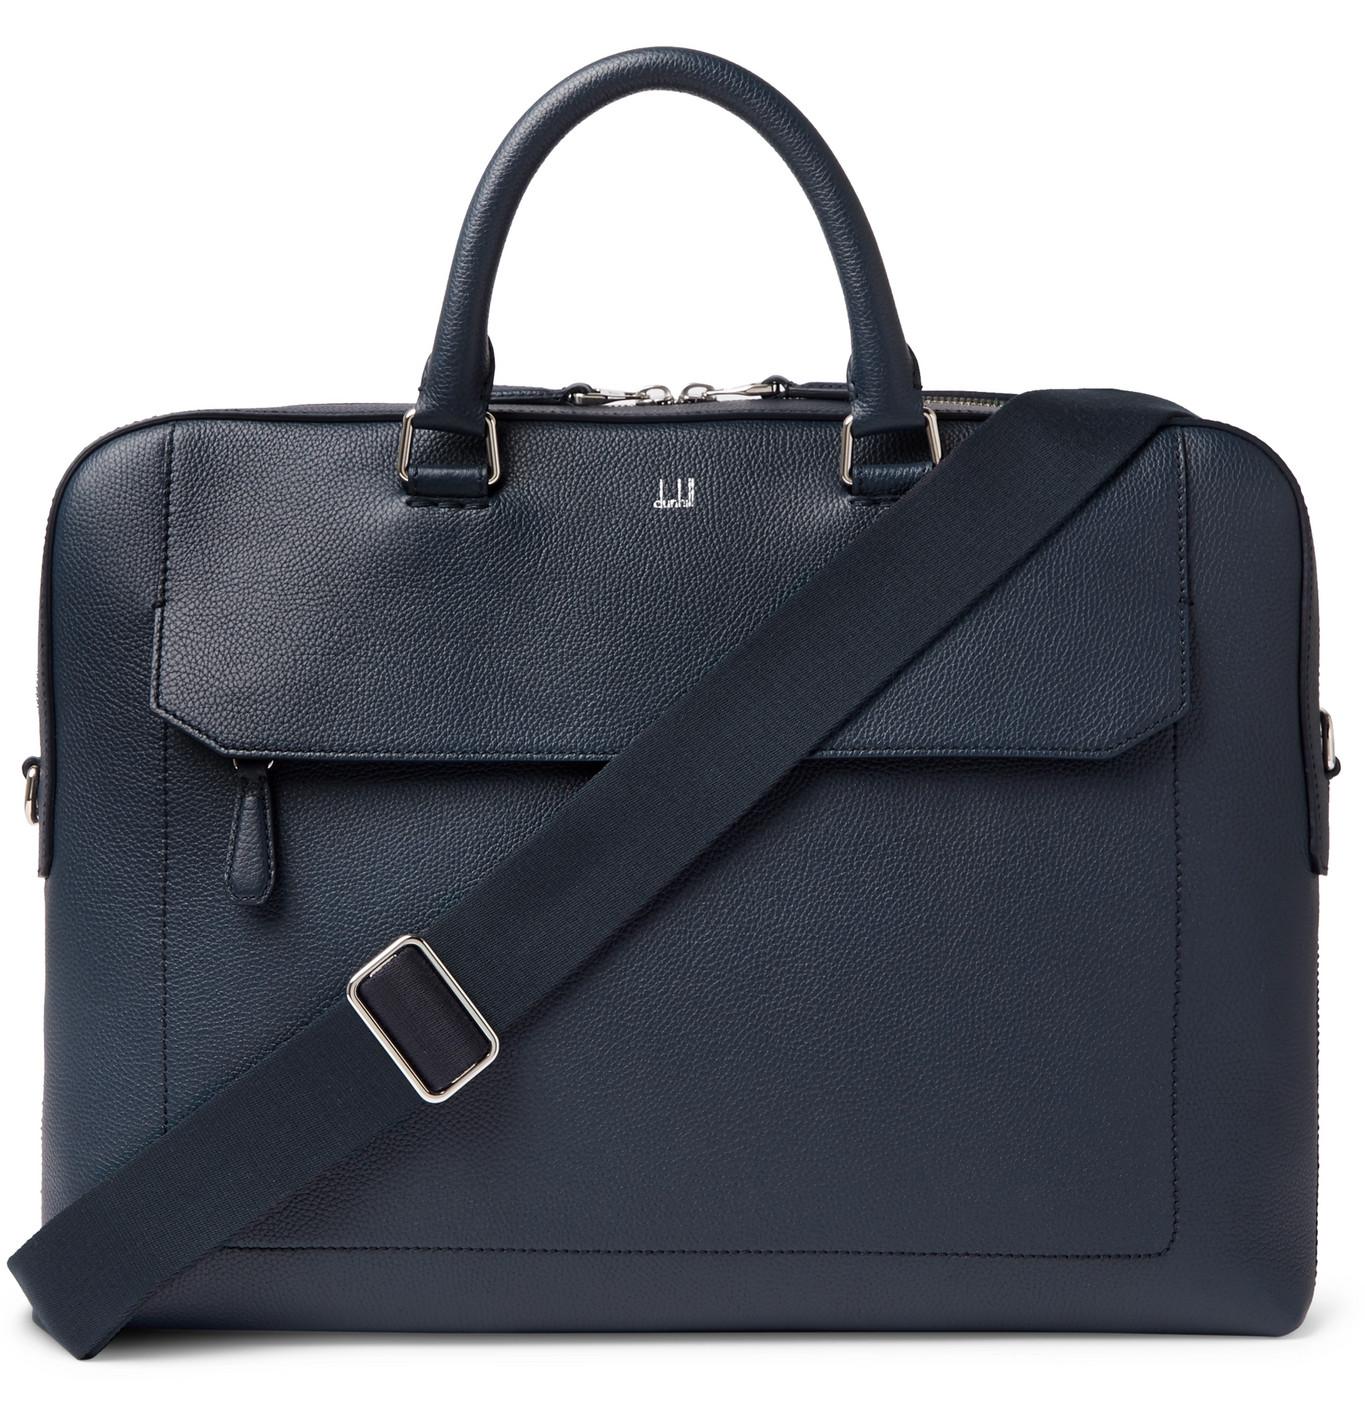 Dunhill Belgrave Full-grain Leather Briefcase in Blue for Men - Lyst